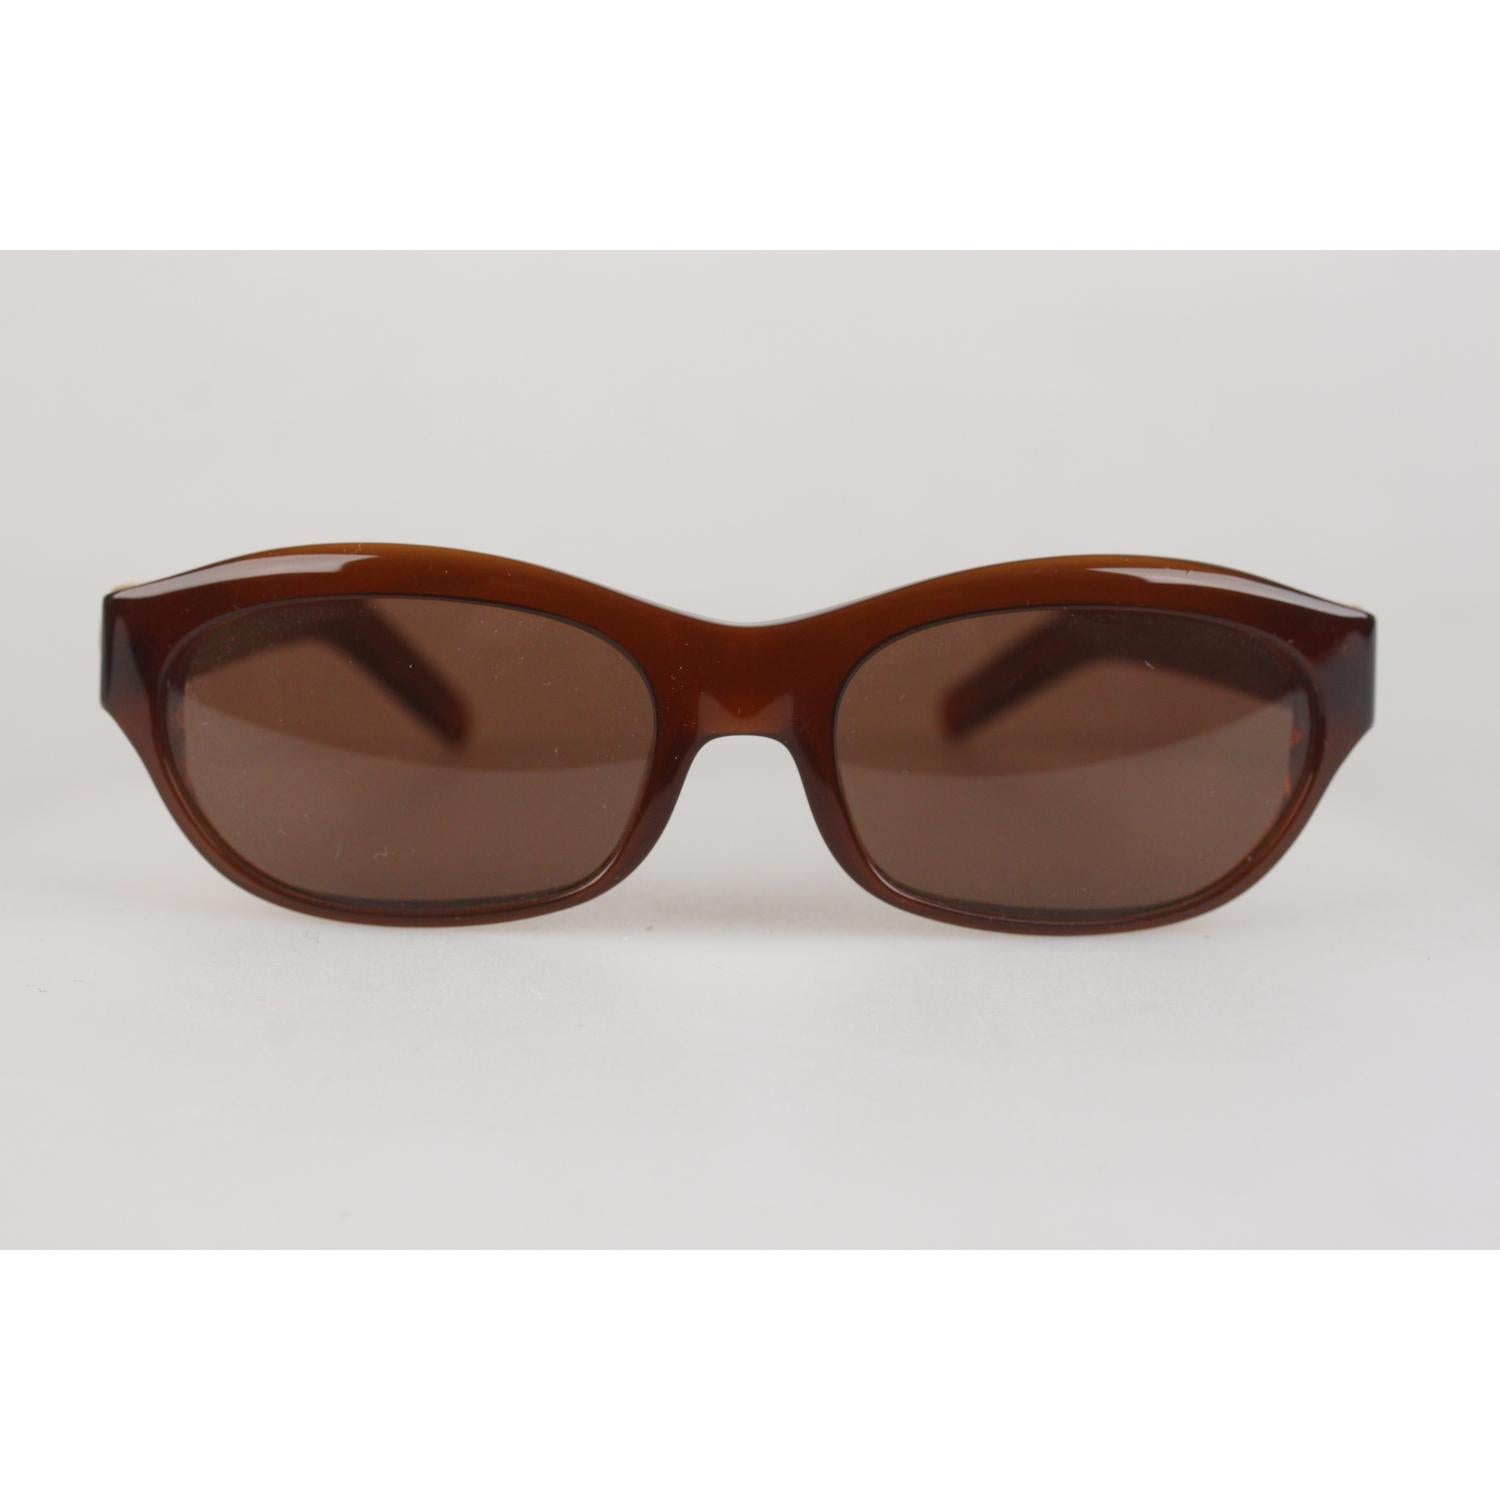 MATERIAL: Acetate, Gold

COLOR: Brown

MODEL: Cat Eye

GENDER: Women

SIZE: Small

COUNTRY OF MANUFACTURE: France

Condition
CONDITION DETAILS:

NOS (NEW OLD STOCK) - Never Worn or Used - Case and Accessories as seen in